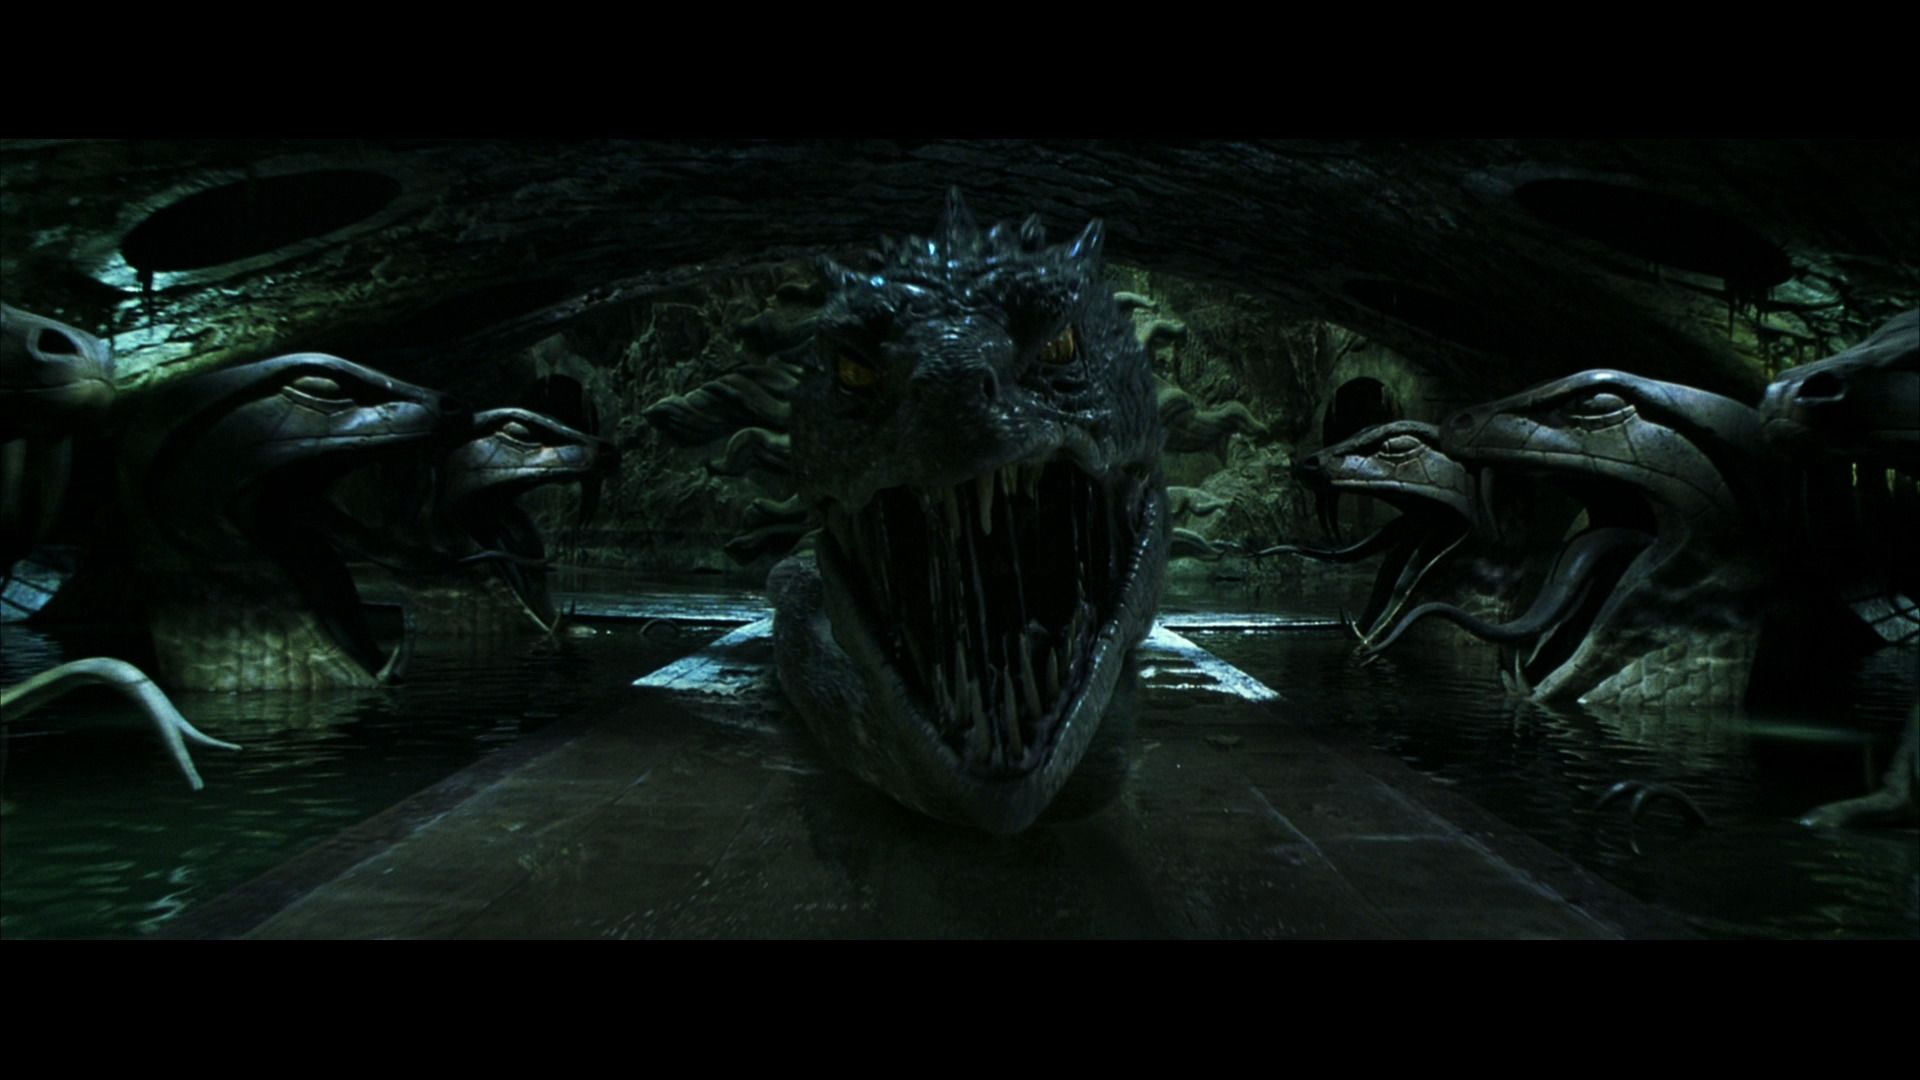 Harry Potter and the Chamber of Secrets (2002) Screencaps.com. Harry potter films, Chamber of secrets, Basilisk harry potter